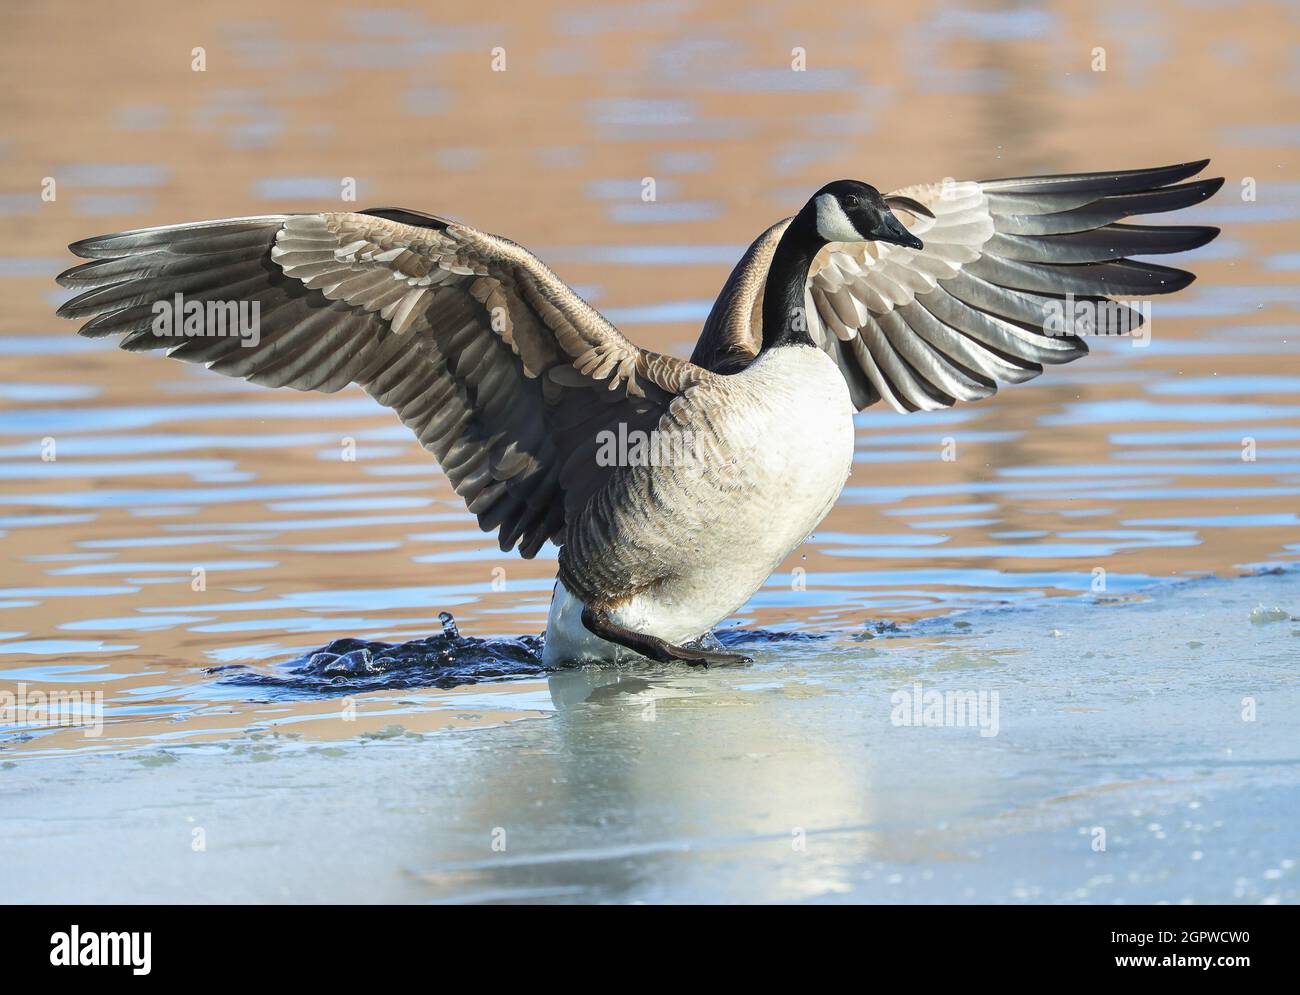 A Canadian Goose secures a foothold on the ice as it emerges from a Winter Lake with wings flapping. Stock Photo